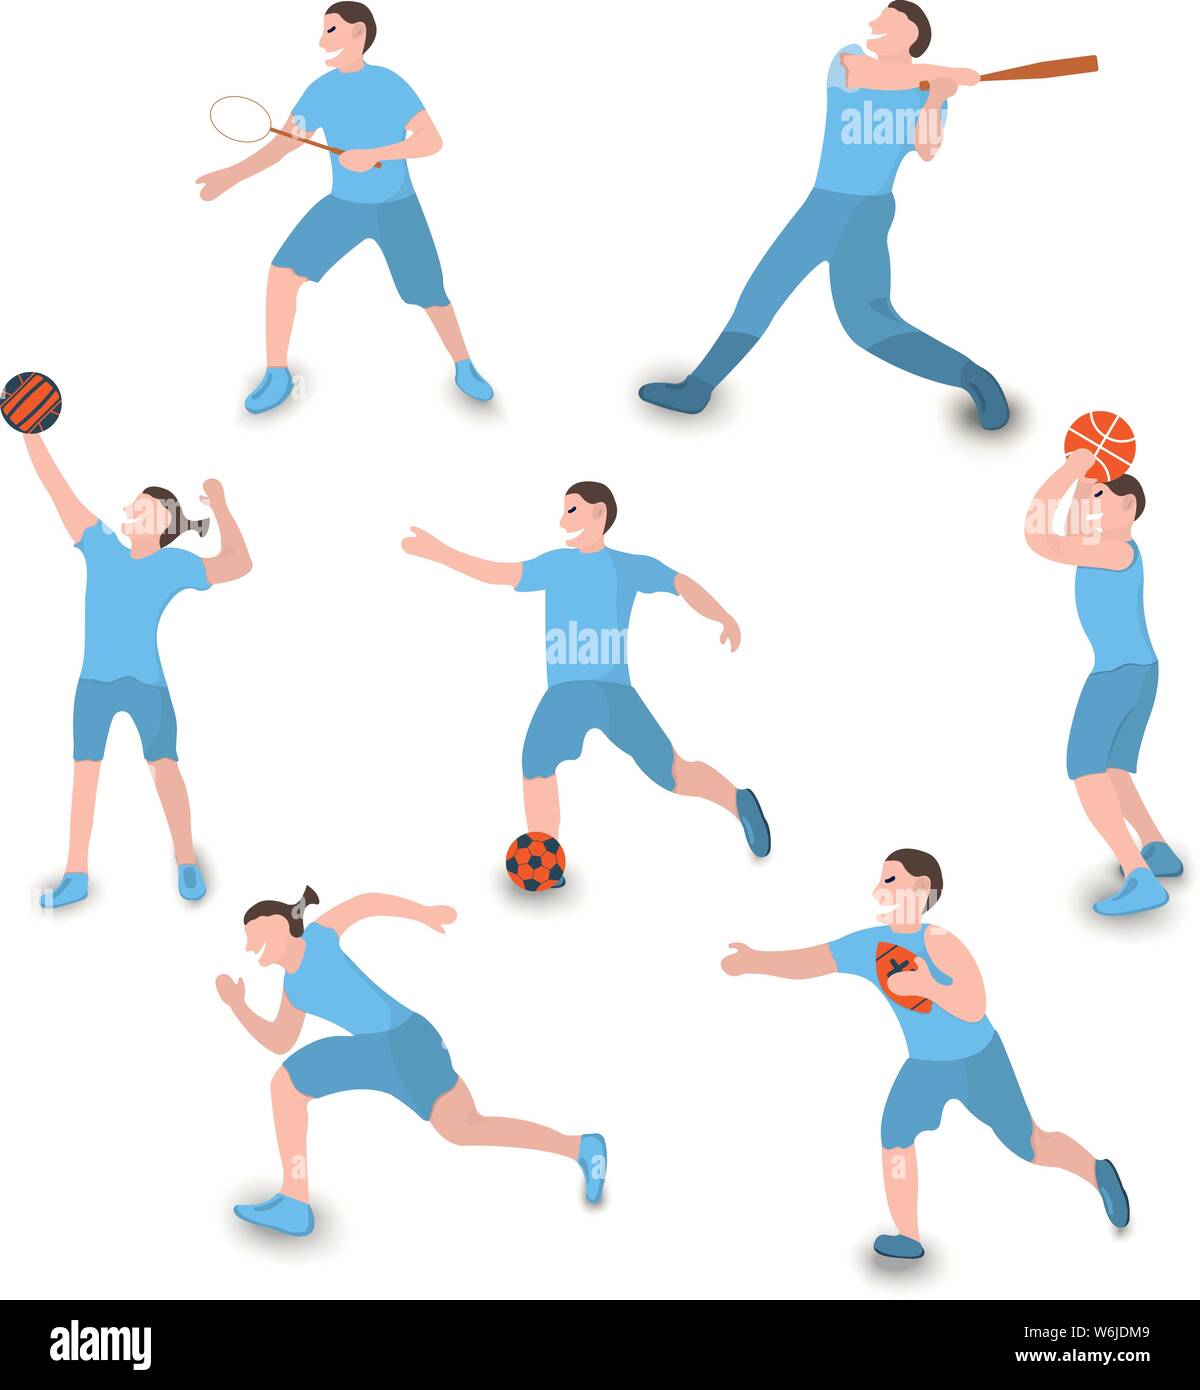 Set of player icon. Sport label on white Background. Character Cartoon style. Vector Illustration. Stock Vector